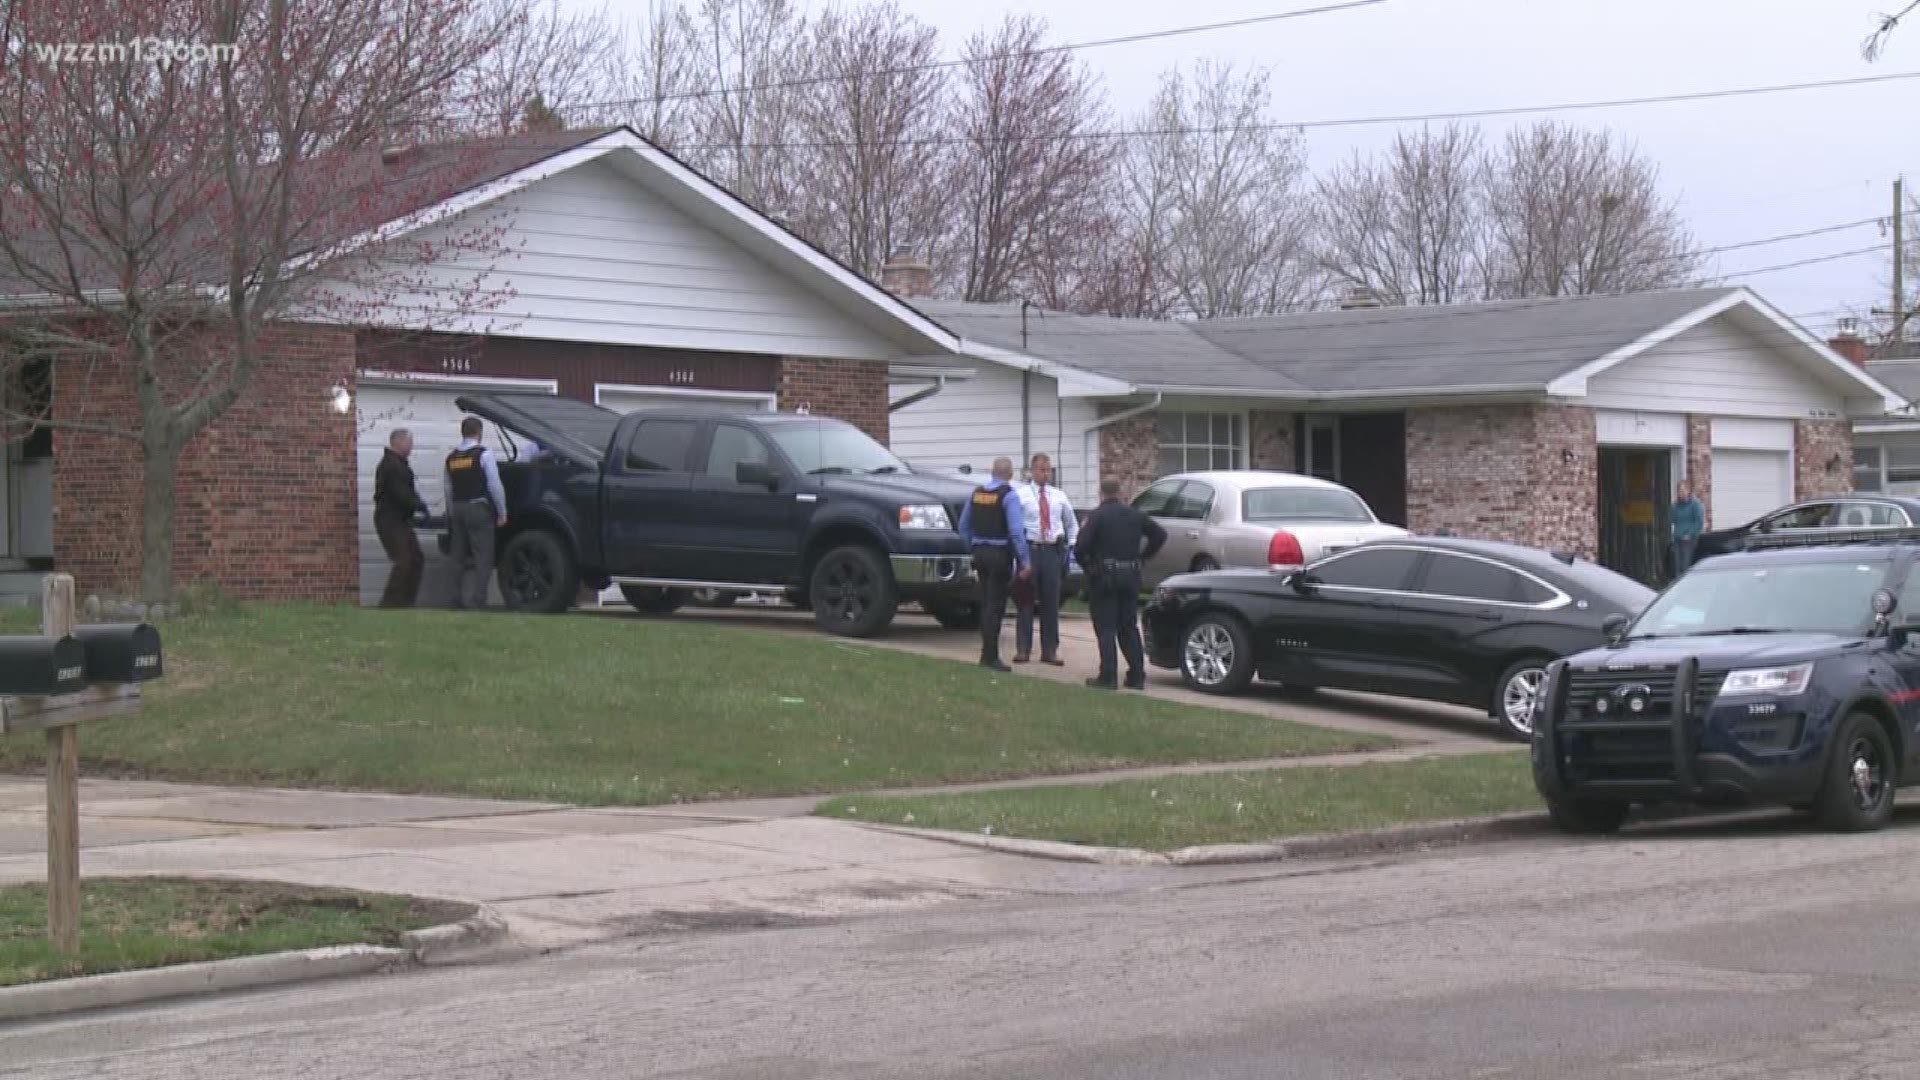 Standoff in Grand Rapids ends peacefully